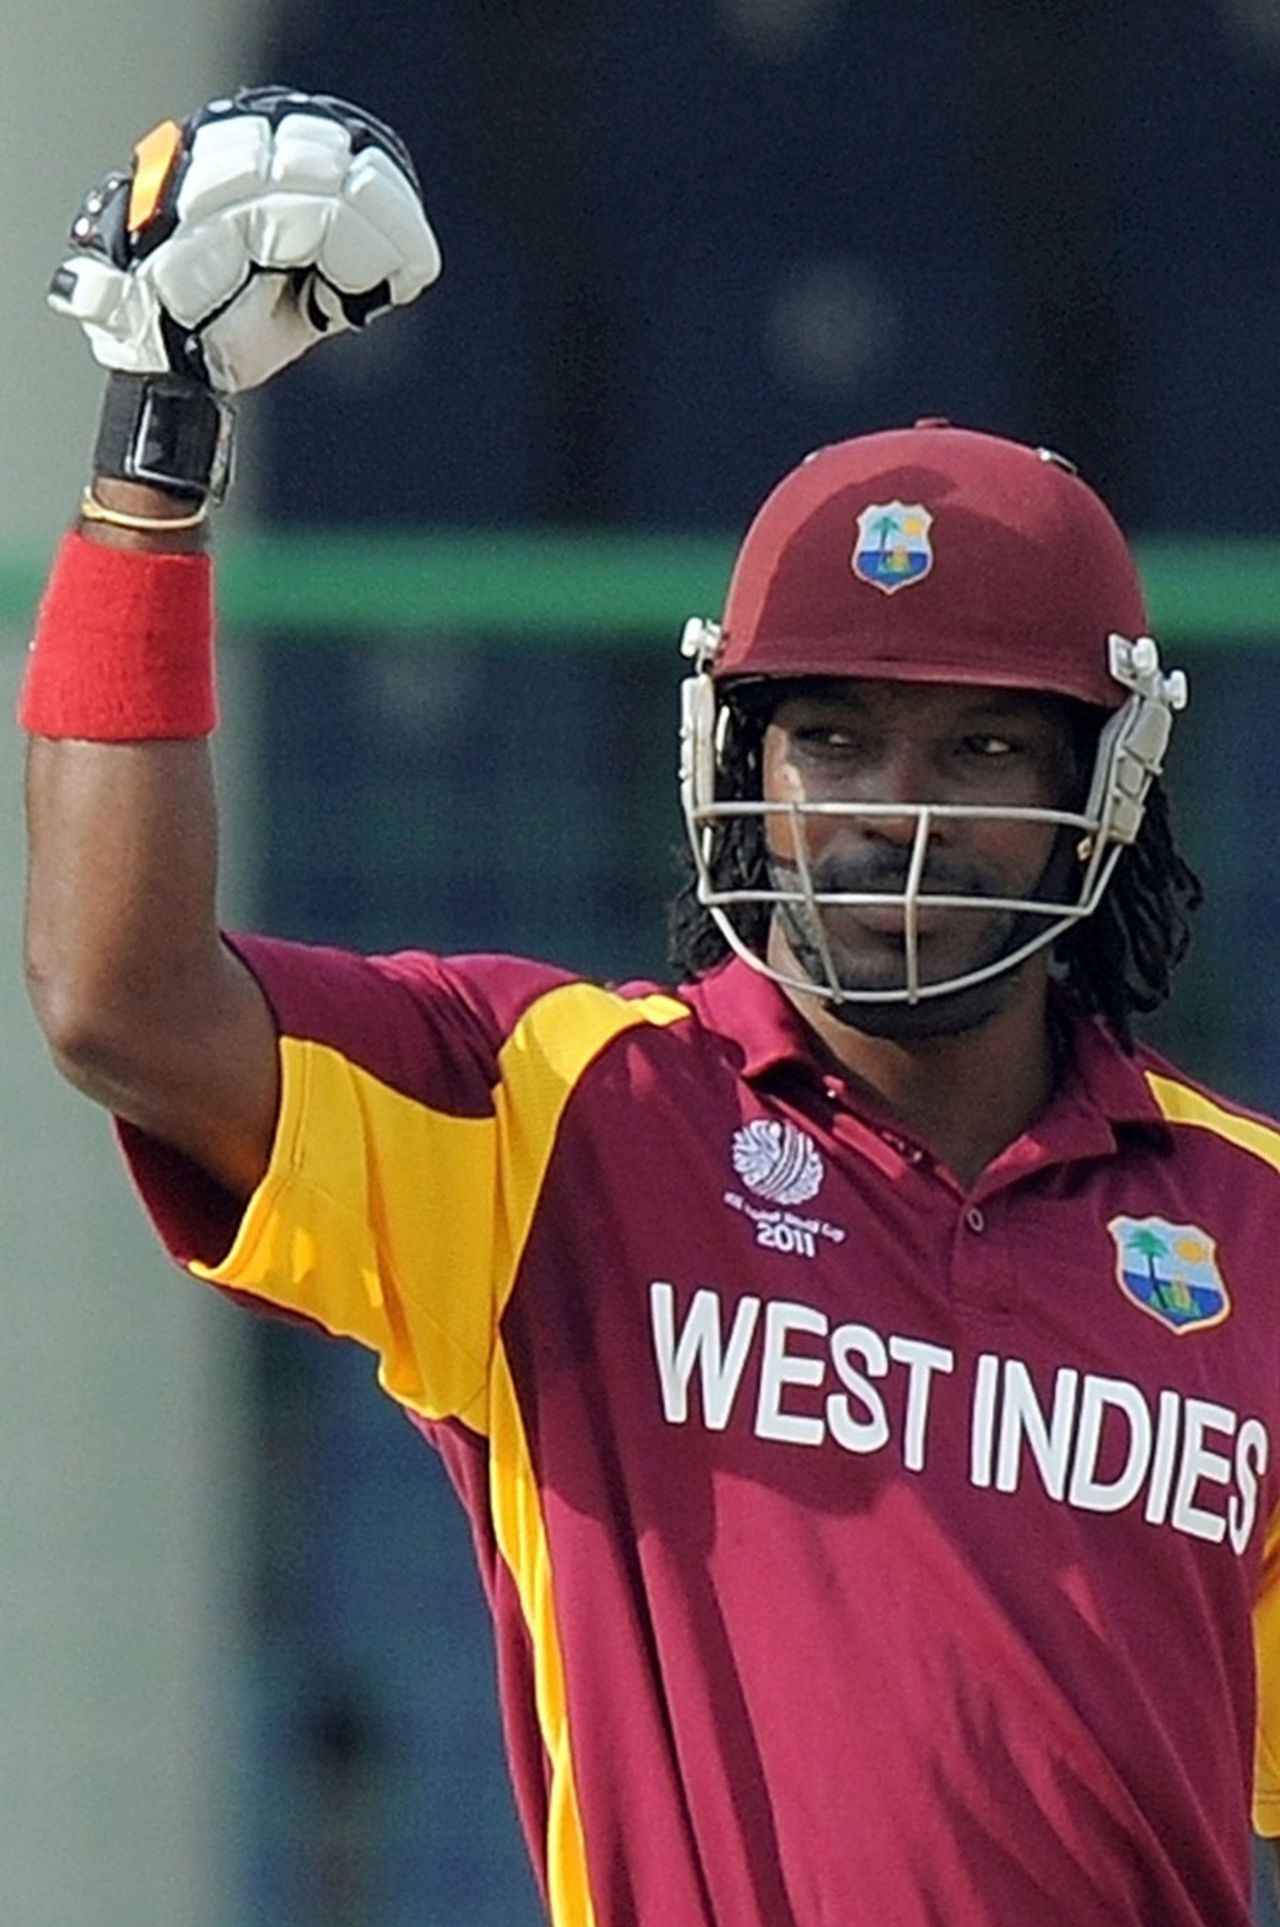 Chris Gayle top scored for West Indies with 80, Netherlands v West Indies, Group B, World Cup 2011, Delhi, February 28, 2011